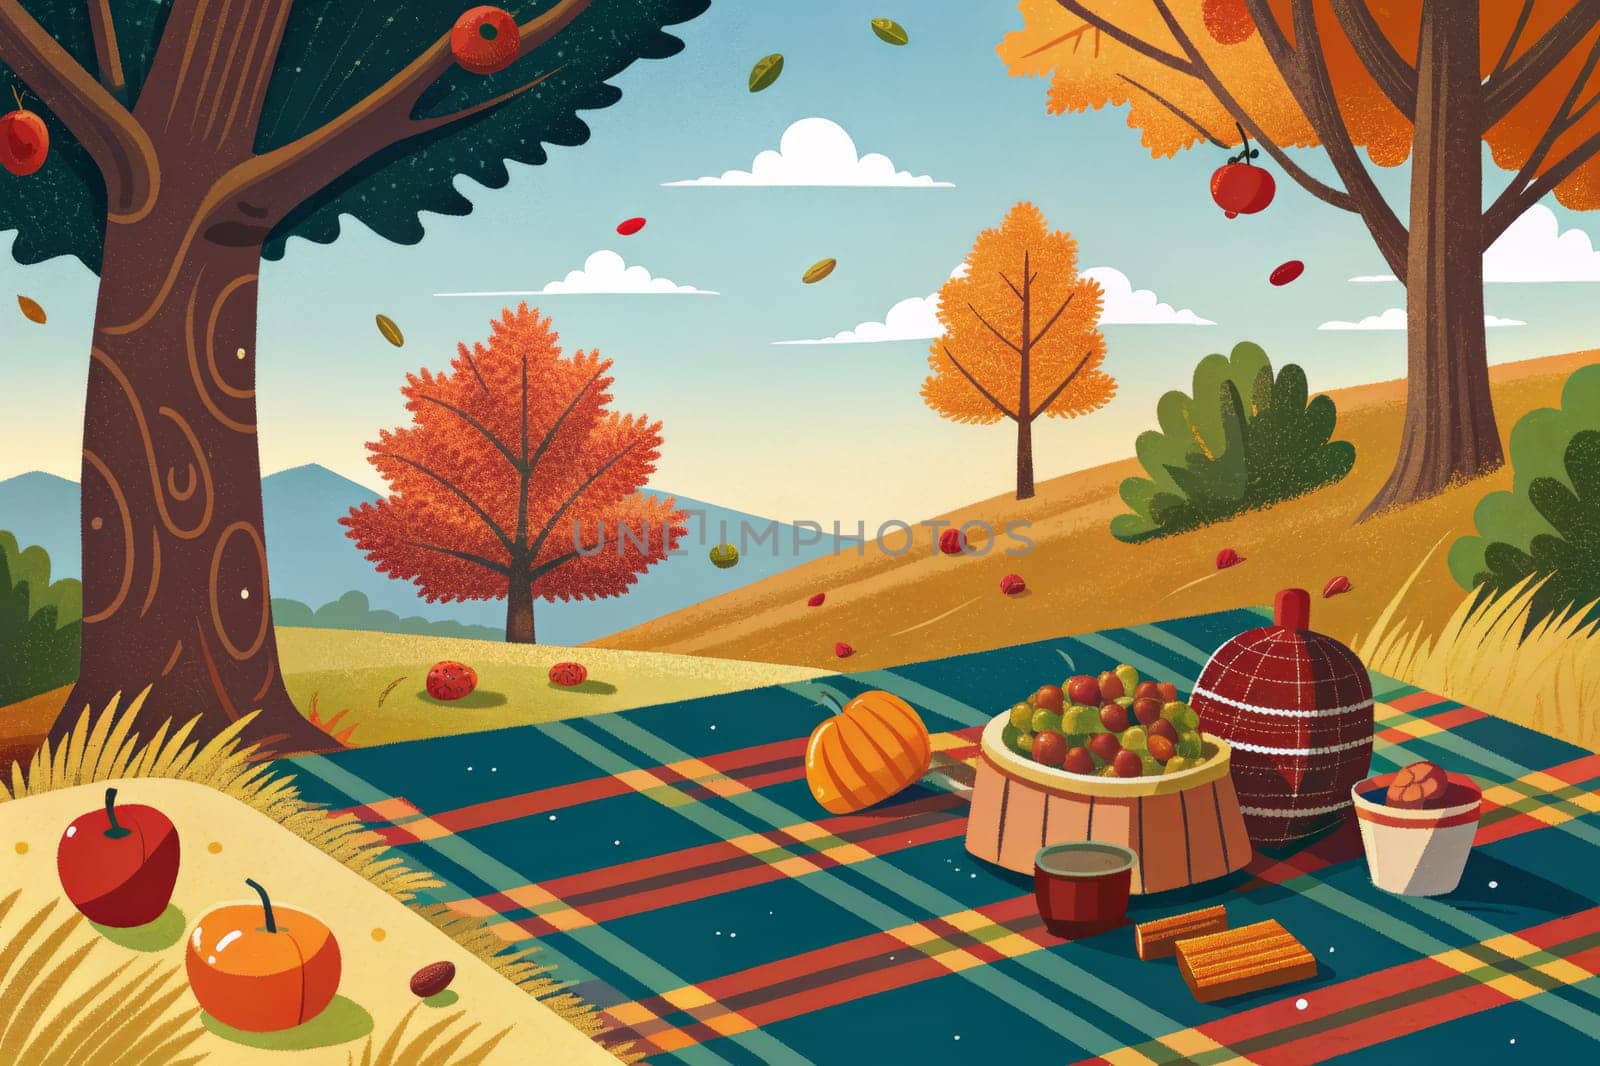 A checkered picnic blanket is spread out under the shade of a large tree, surrounded by fallen leaves and pumpkins. A bowl of bright orange fruit sits on the blanket, along with a teapot, a loaf of bread, and two buckets of corn.